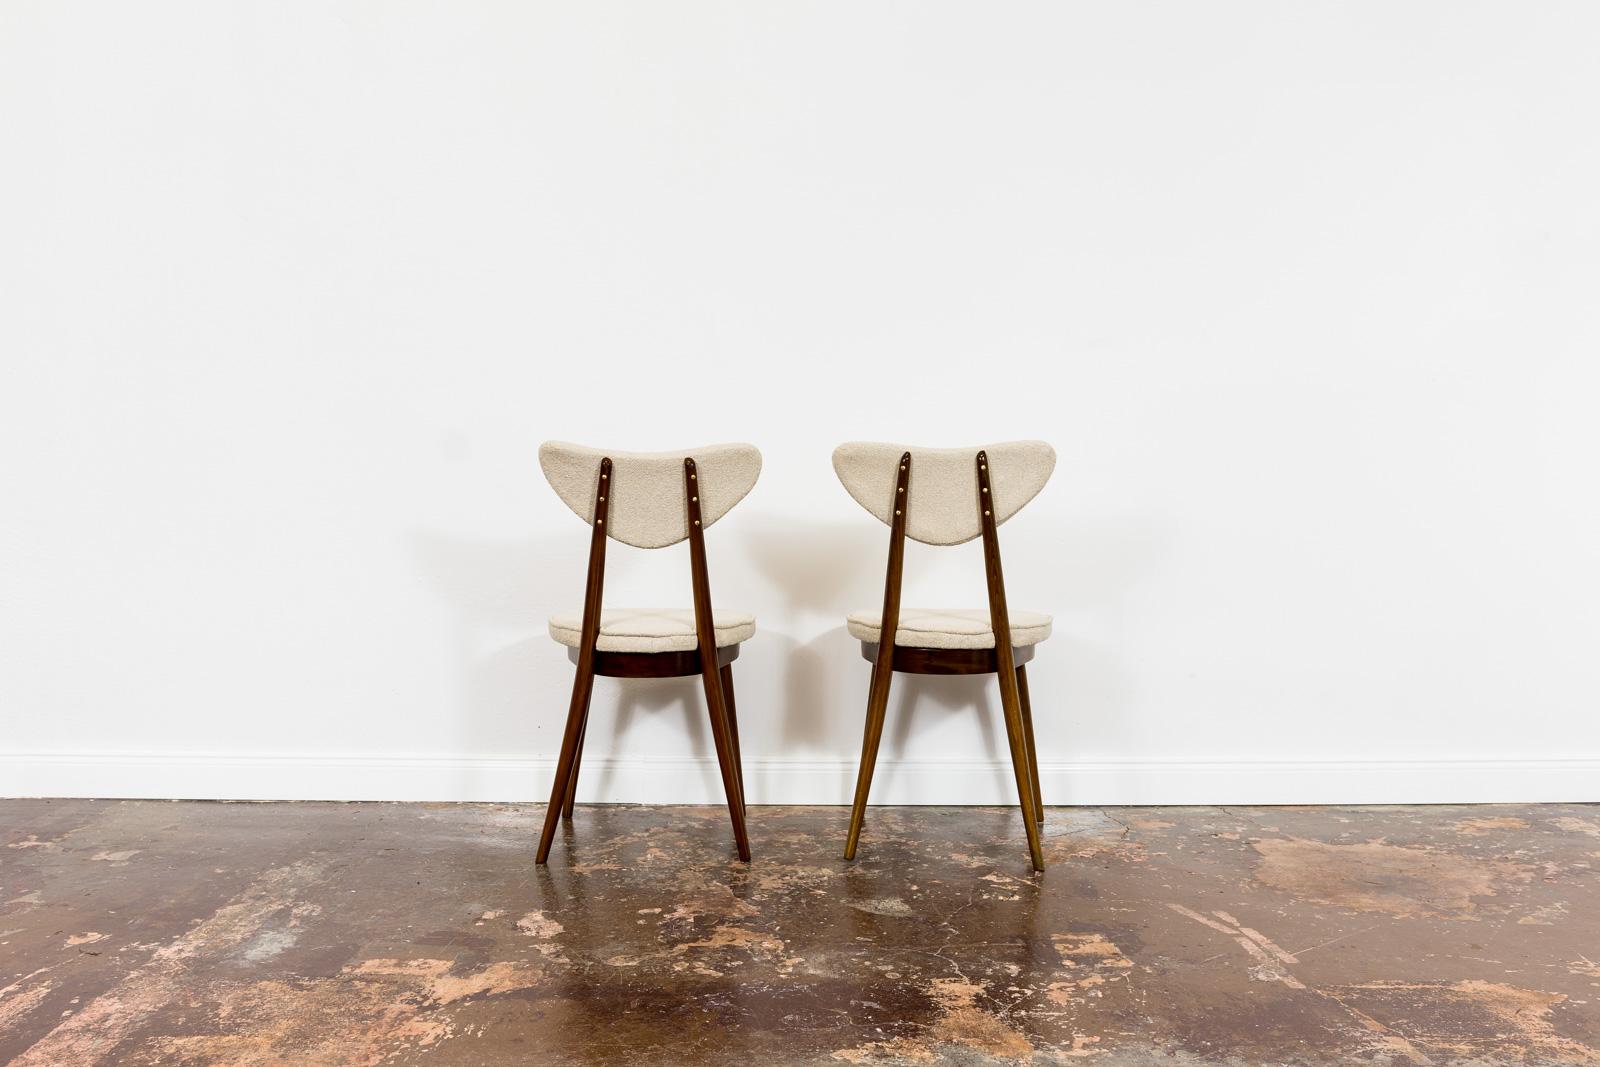 Mid-20th Century Set of 4 Mid-Century Bentwood Chairs in Beige Bouclé by H & J Kurmanowicz, 1950s